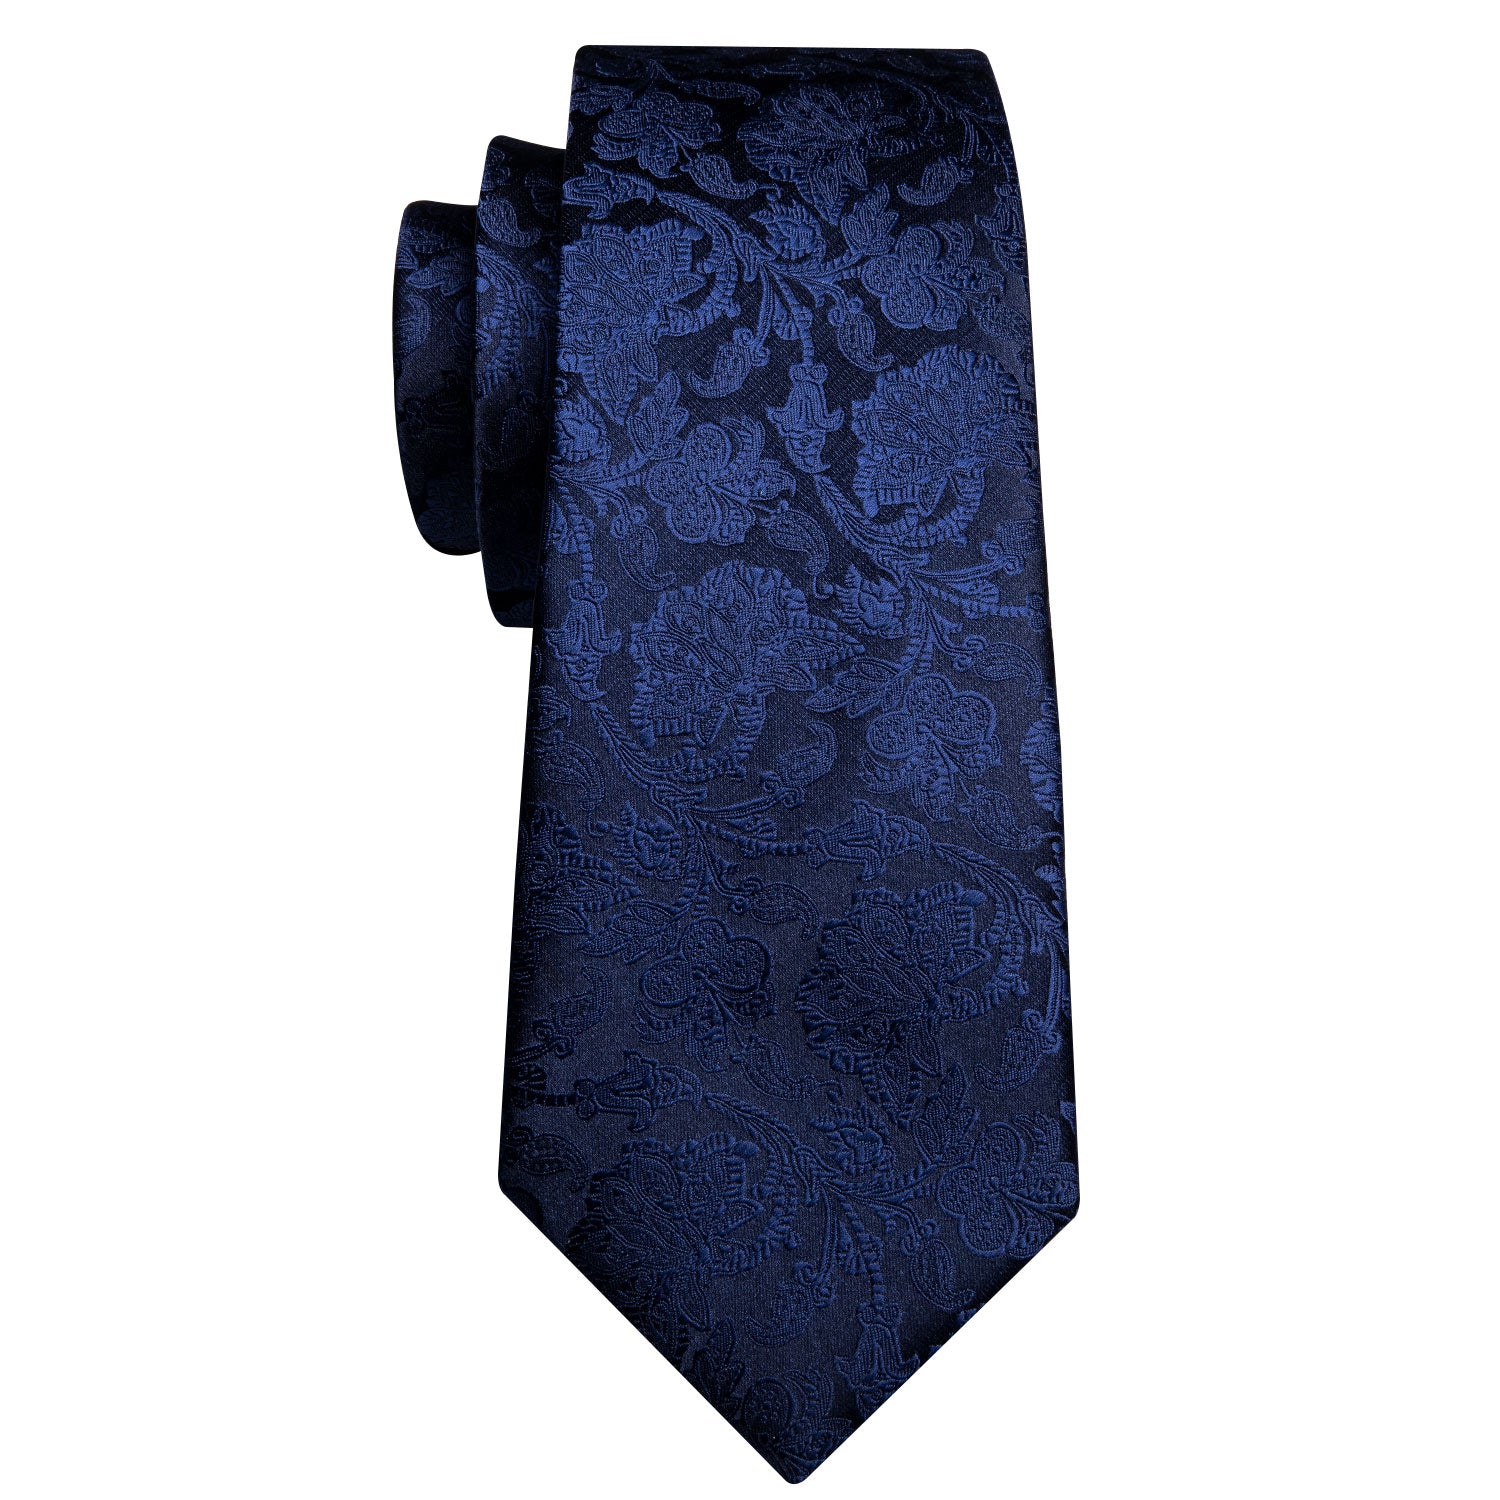 Barry.Wang Extra Long Tie Royal Blue Floral Silk 63 Inches Tie Hanky Cufflinks Set for Men